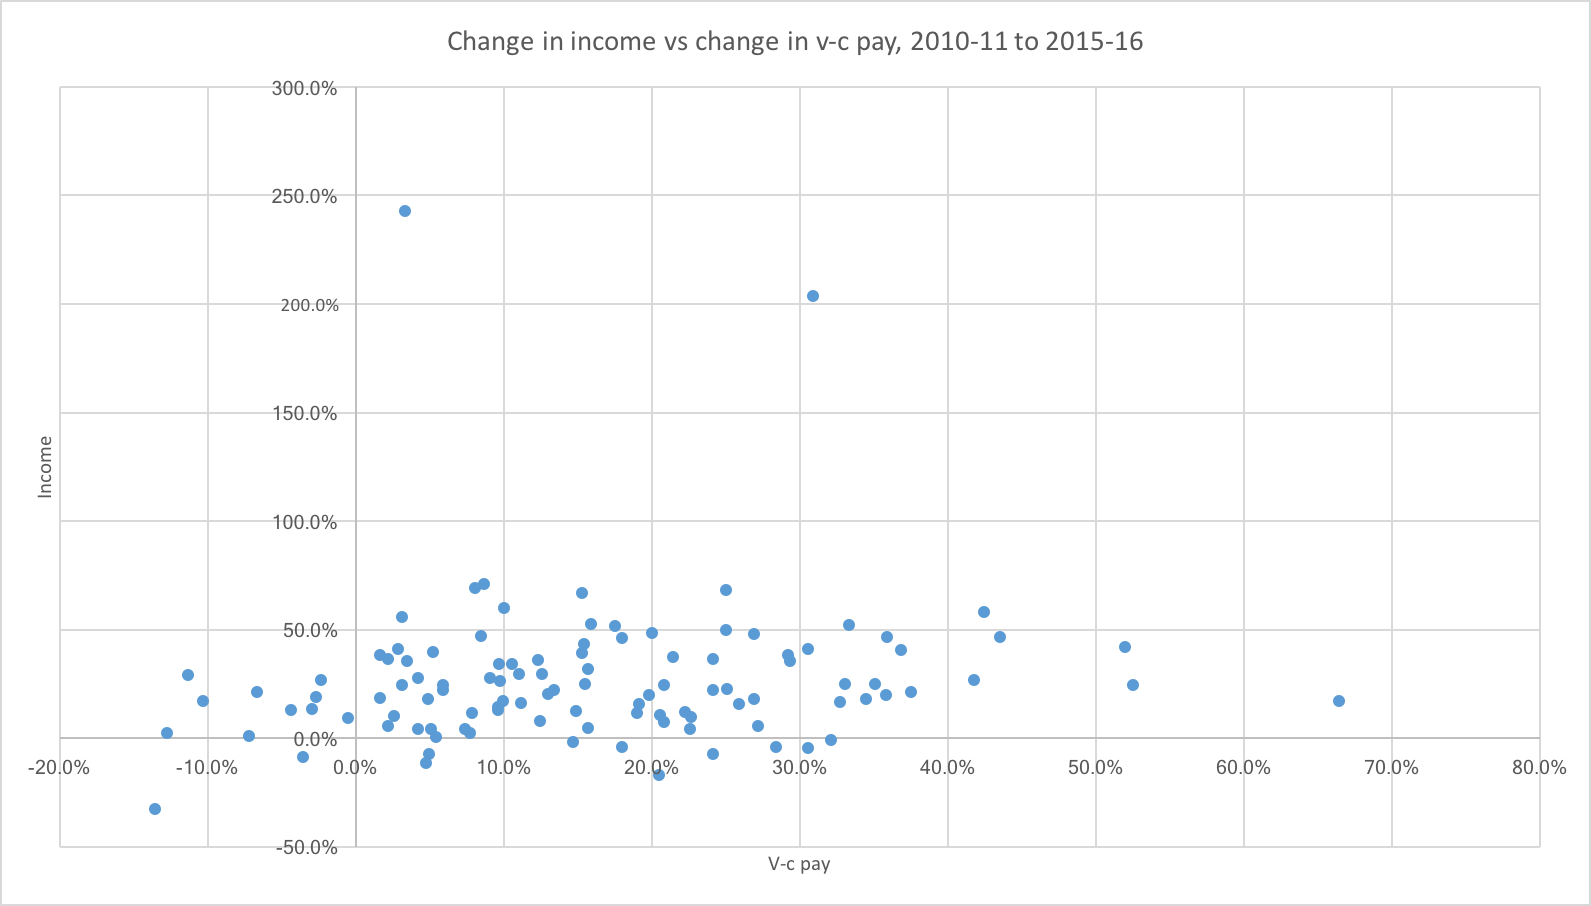 Change in income vs change in v-c pay, 2010-11 to 2015-16